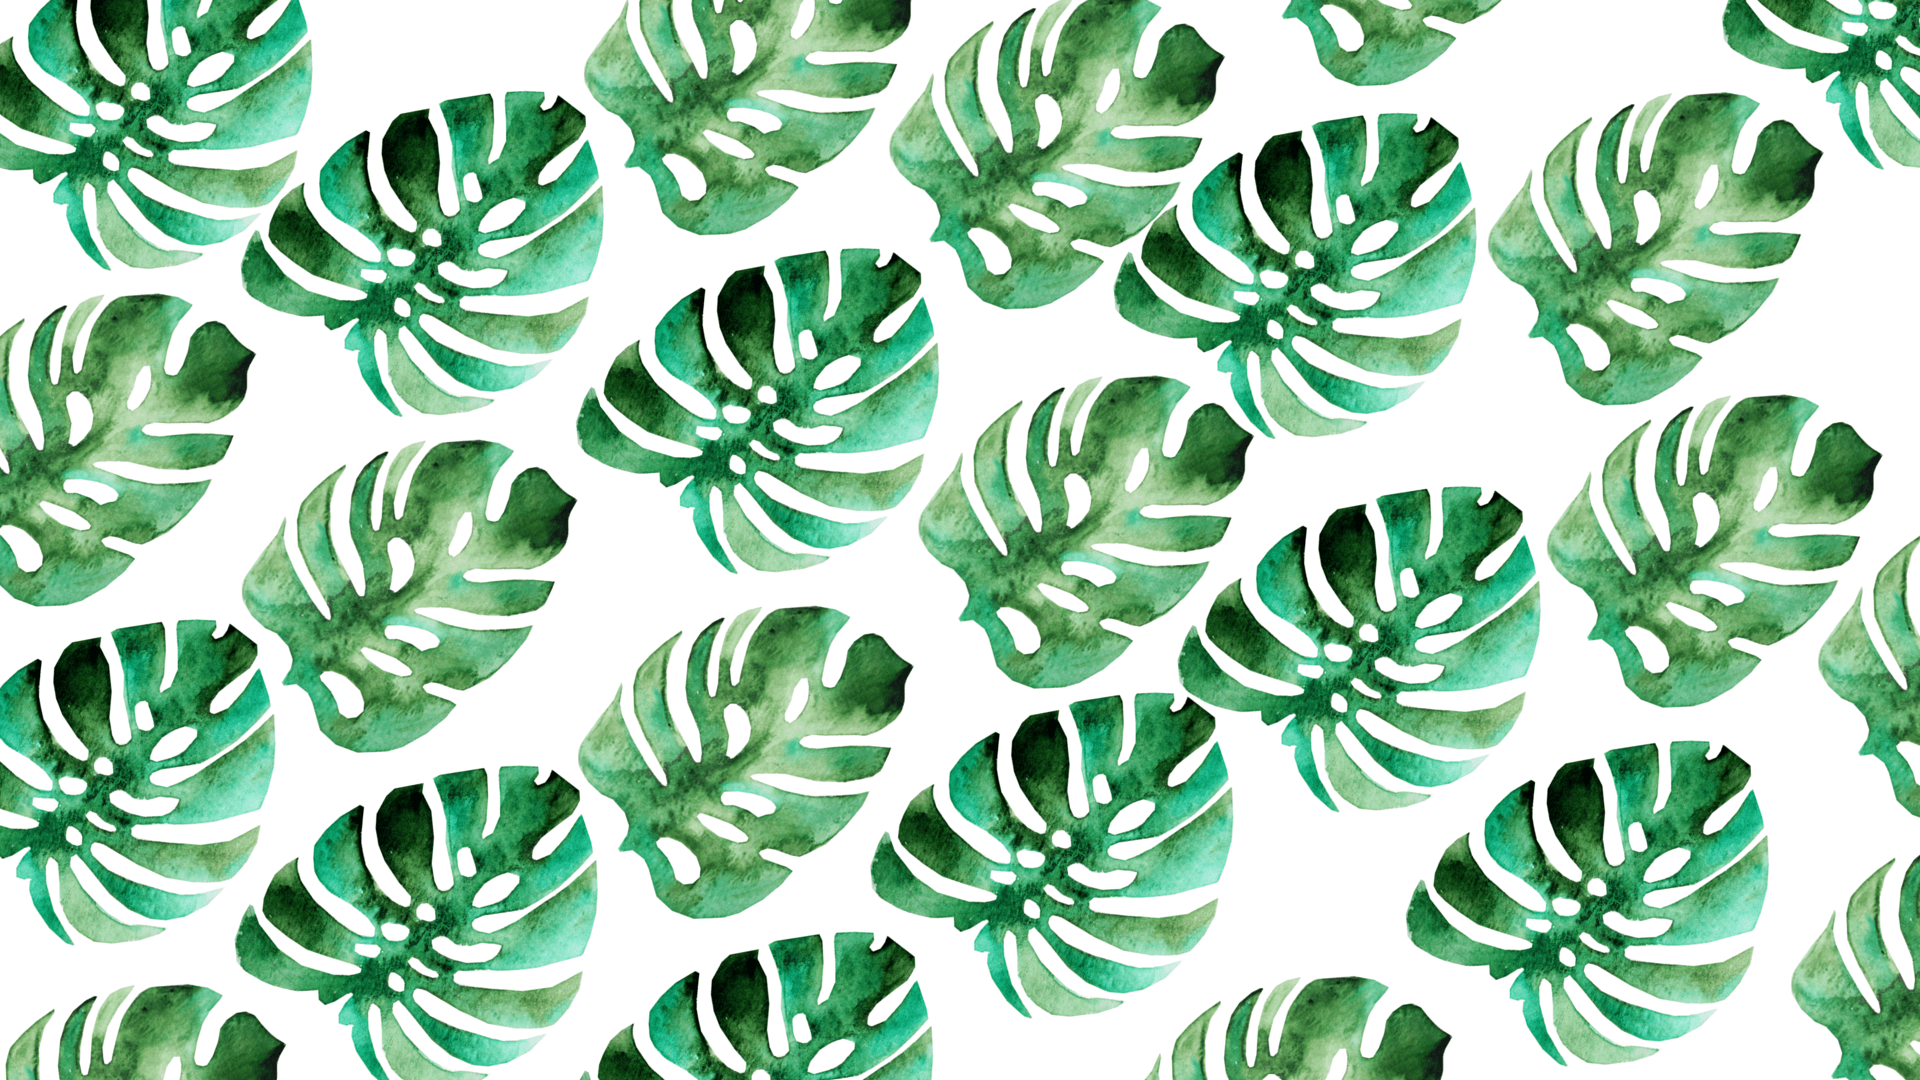 A pattern of green leaves on white background - Summer